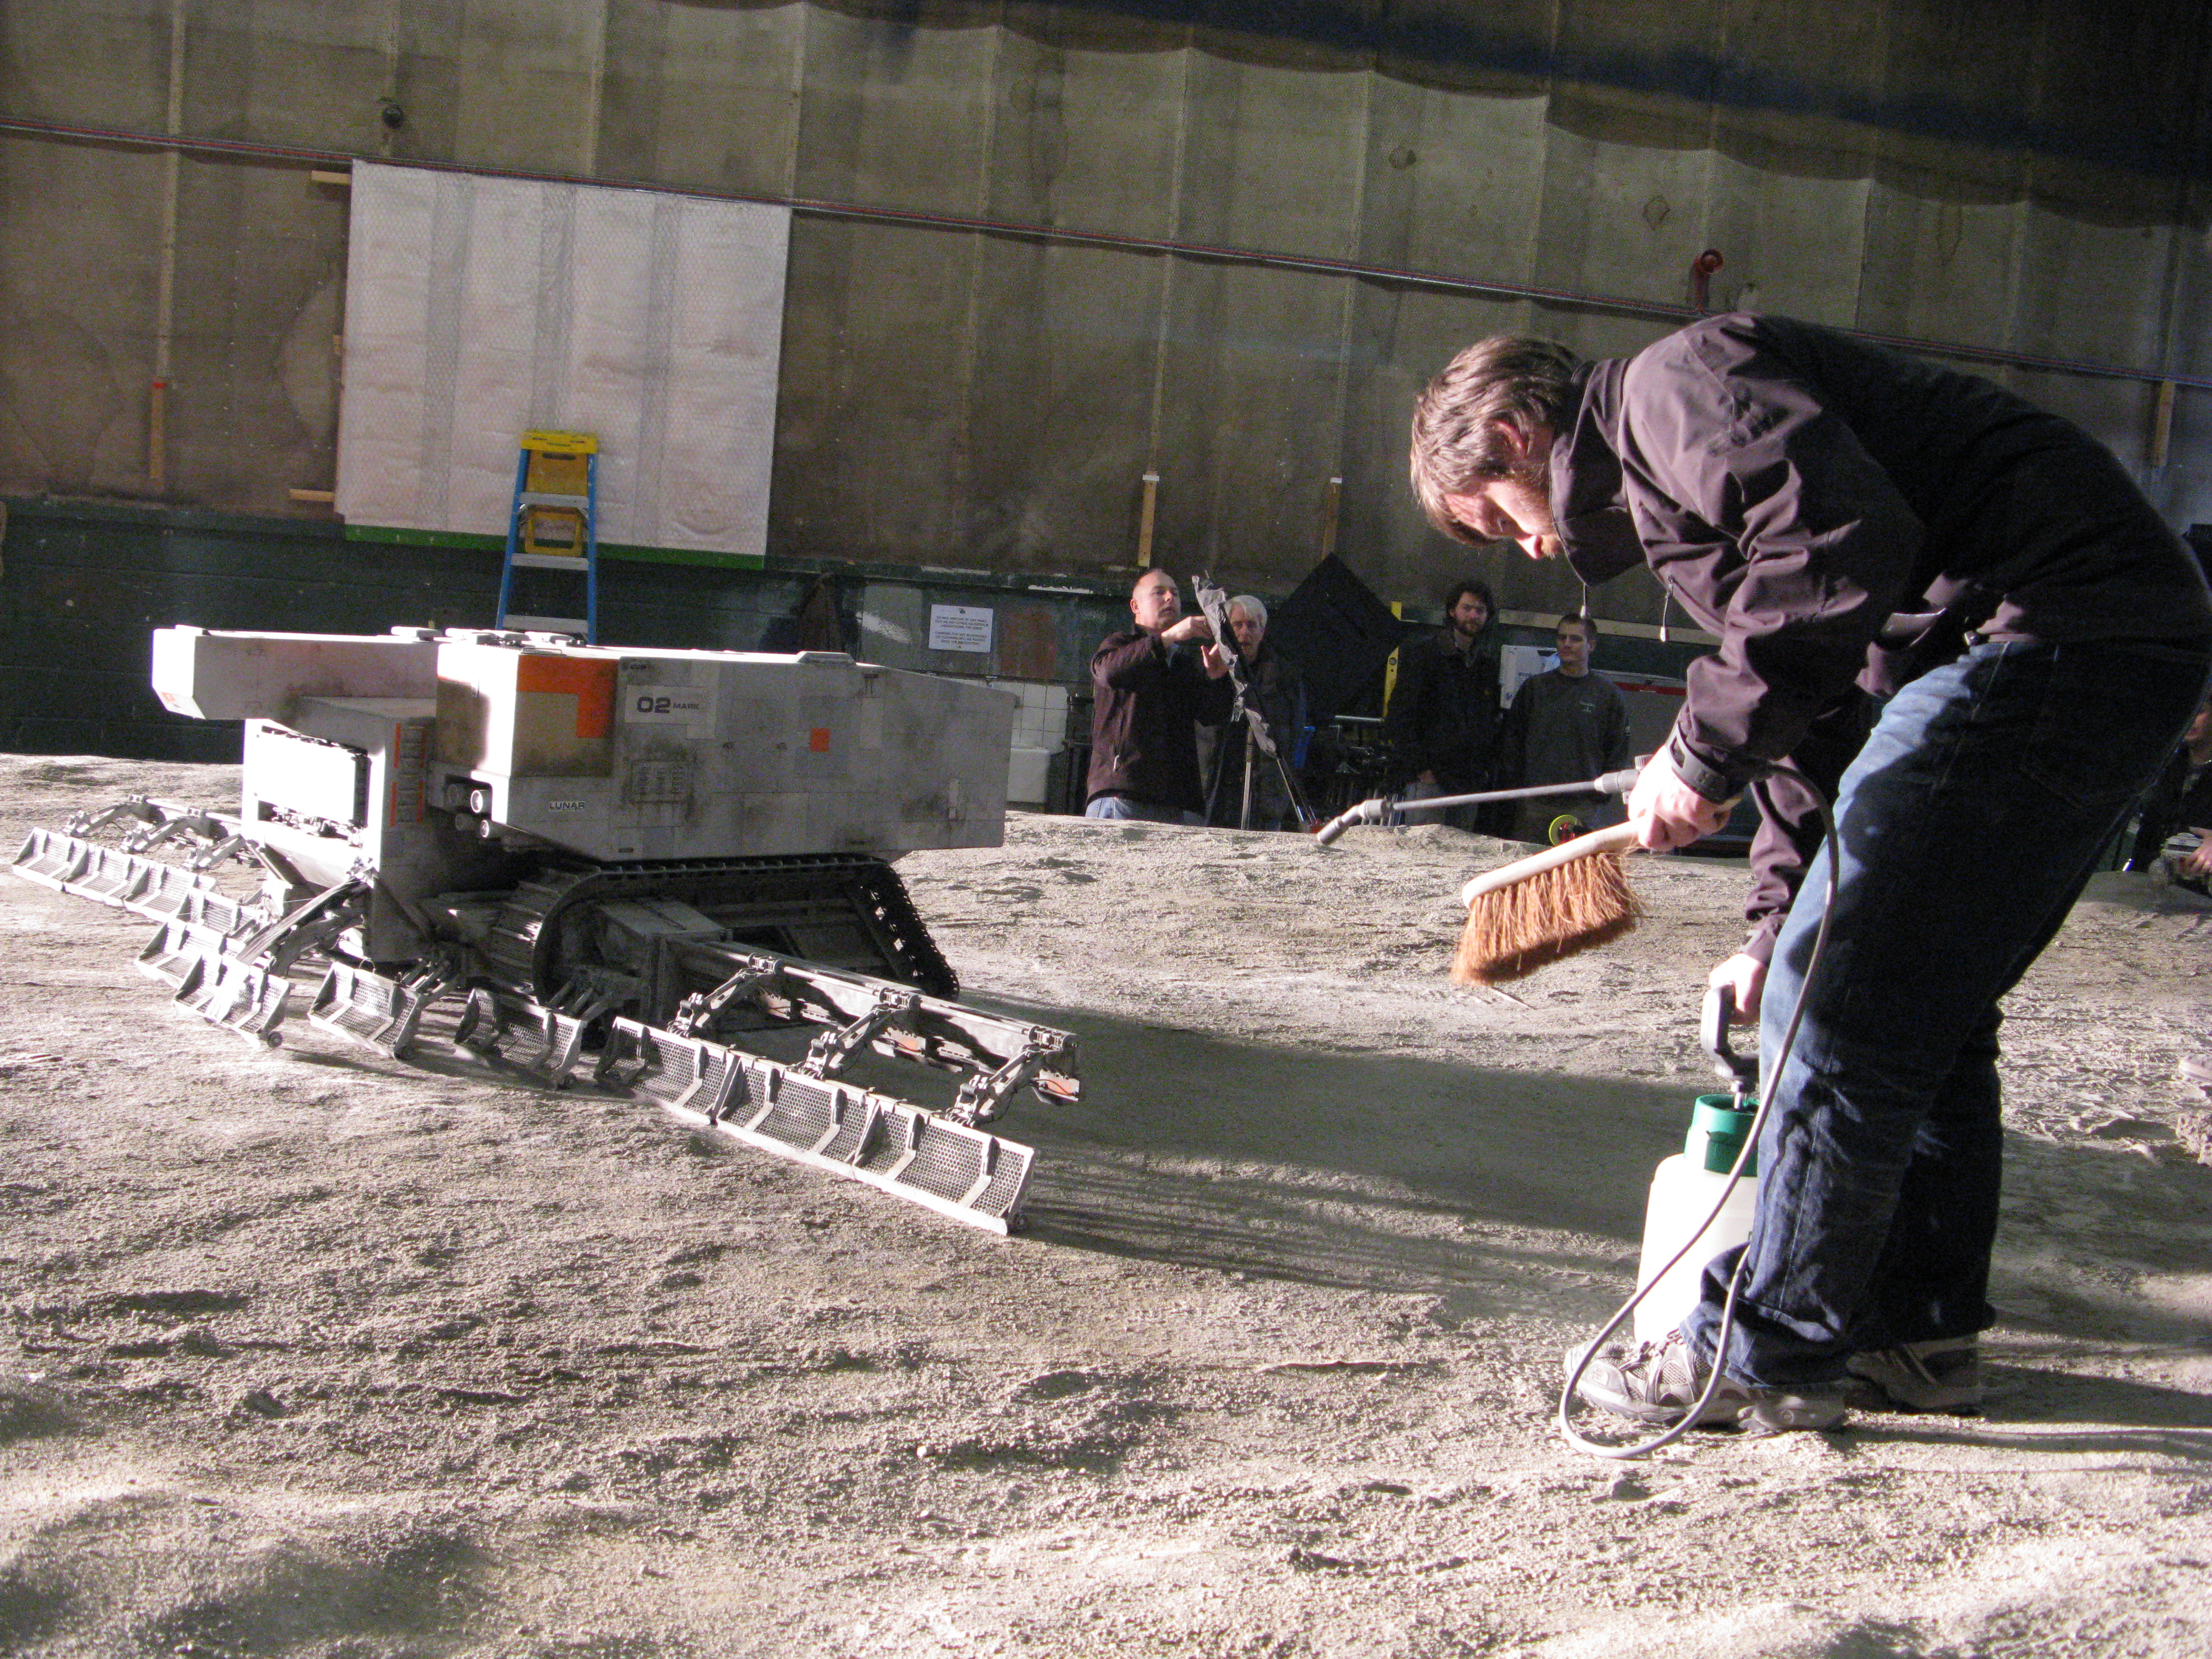 Resetting the 1/12th scale lunar surface for a shot with a harvester vehicle during the model miniature shoot for 